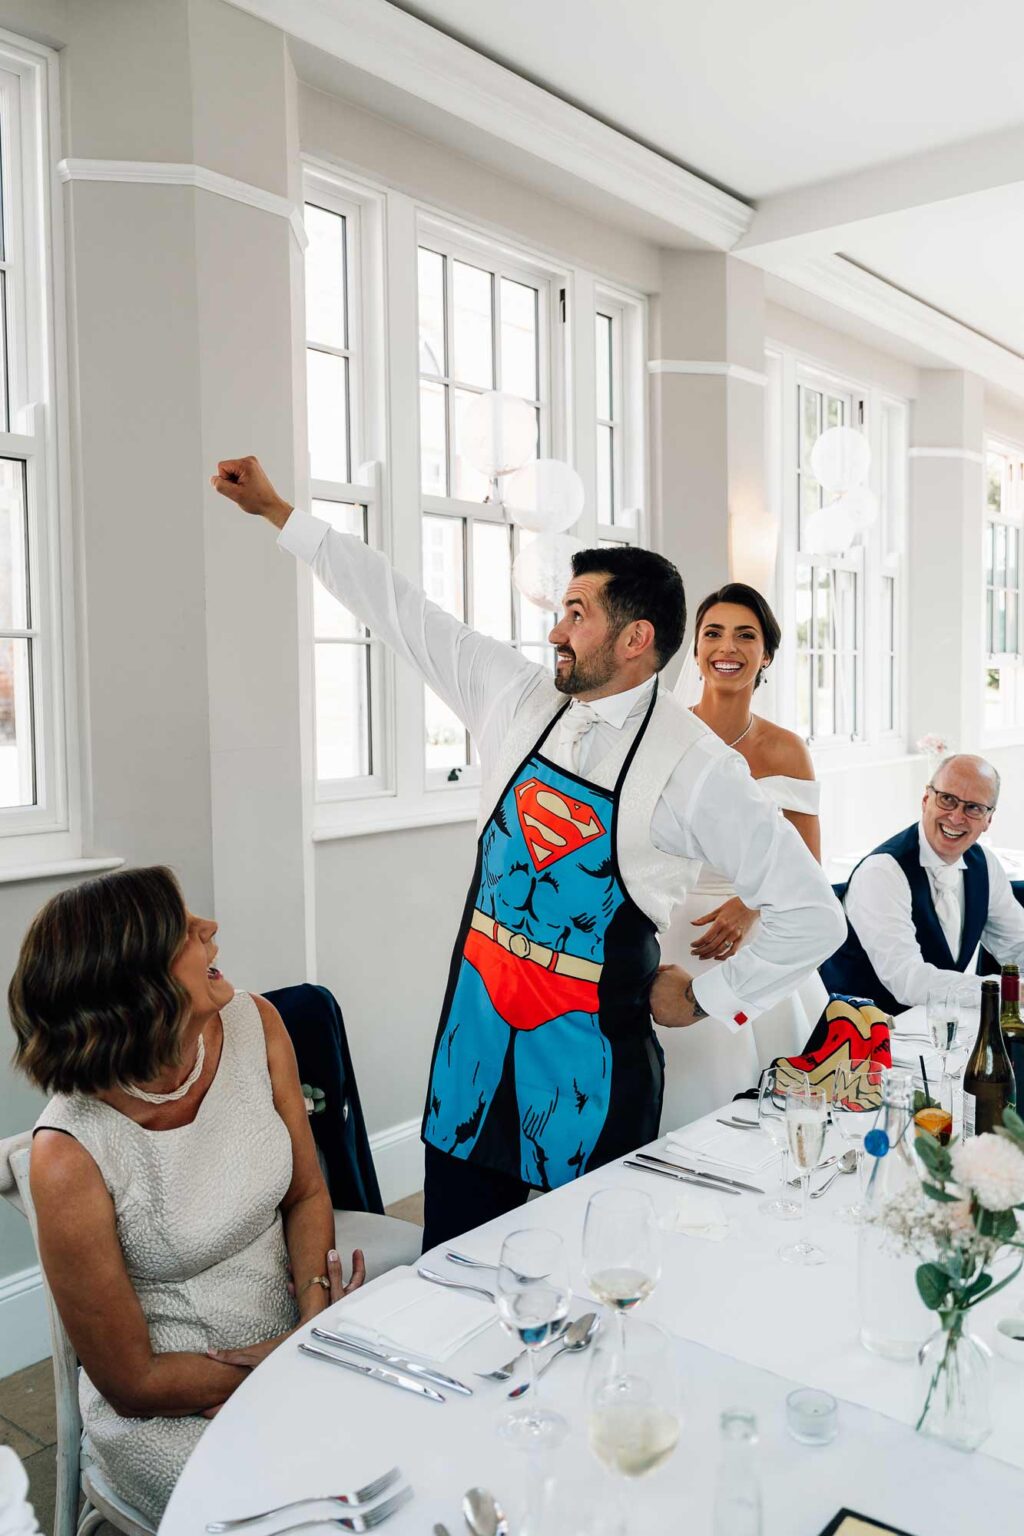 Super Groom as speeches become fun at wedding venue